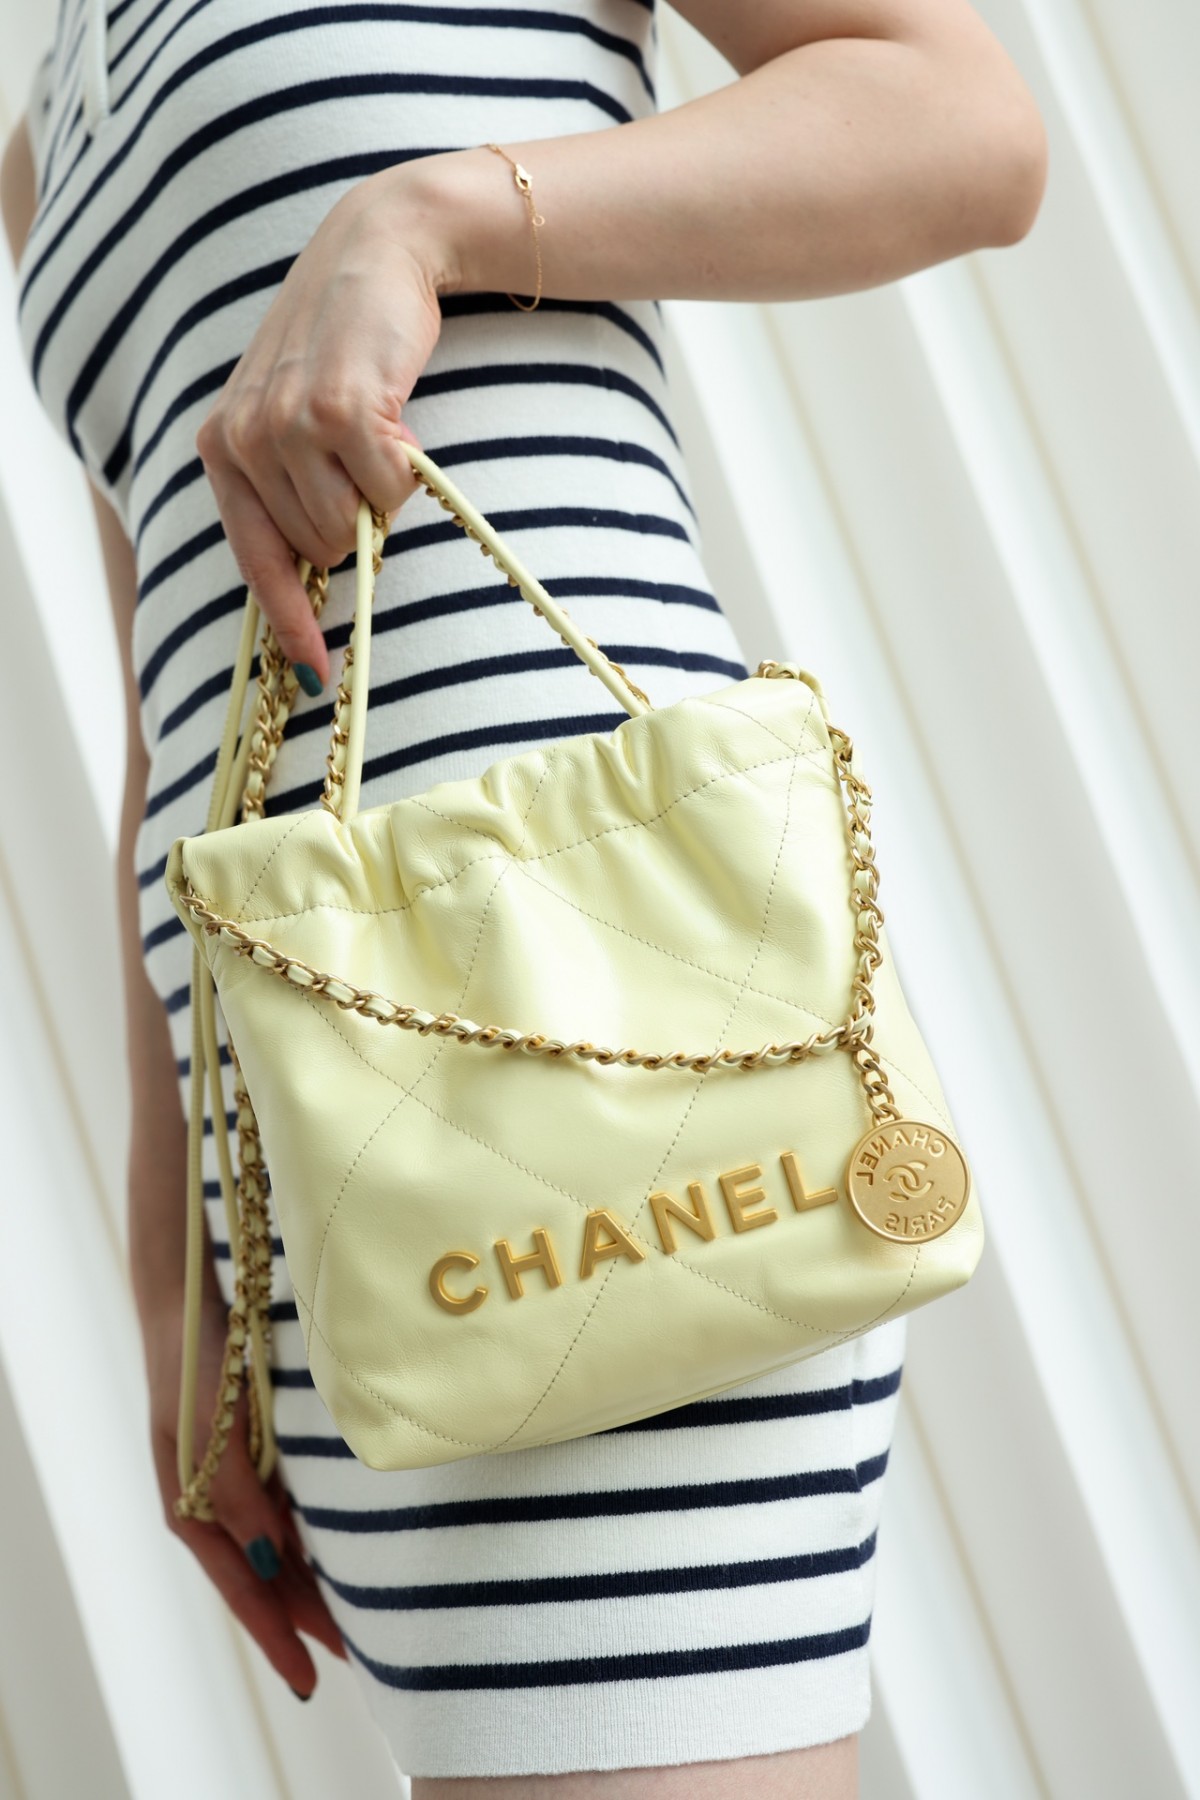 Shebag heard yellow Chanel 22 mini bag is out of stock at boutique, we replicated it! (2023 updated)-Tayada ugu Fiican ee Louis Vuitton Boorsada Online Store, Bac naqshadeeye nuqul ah